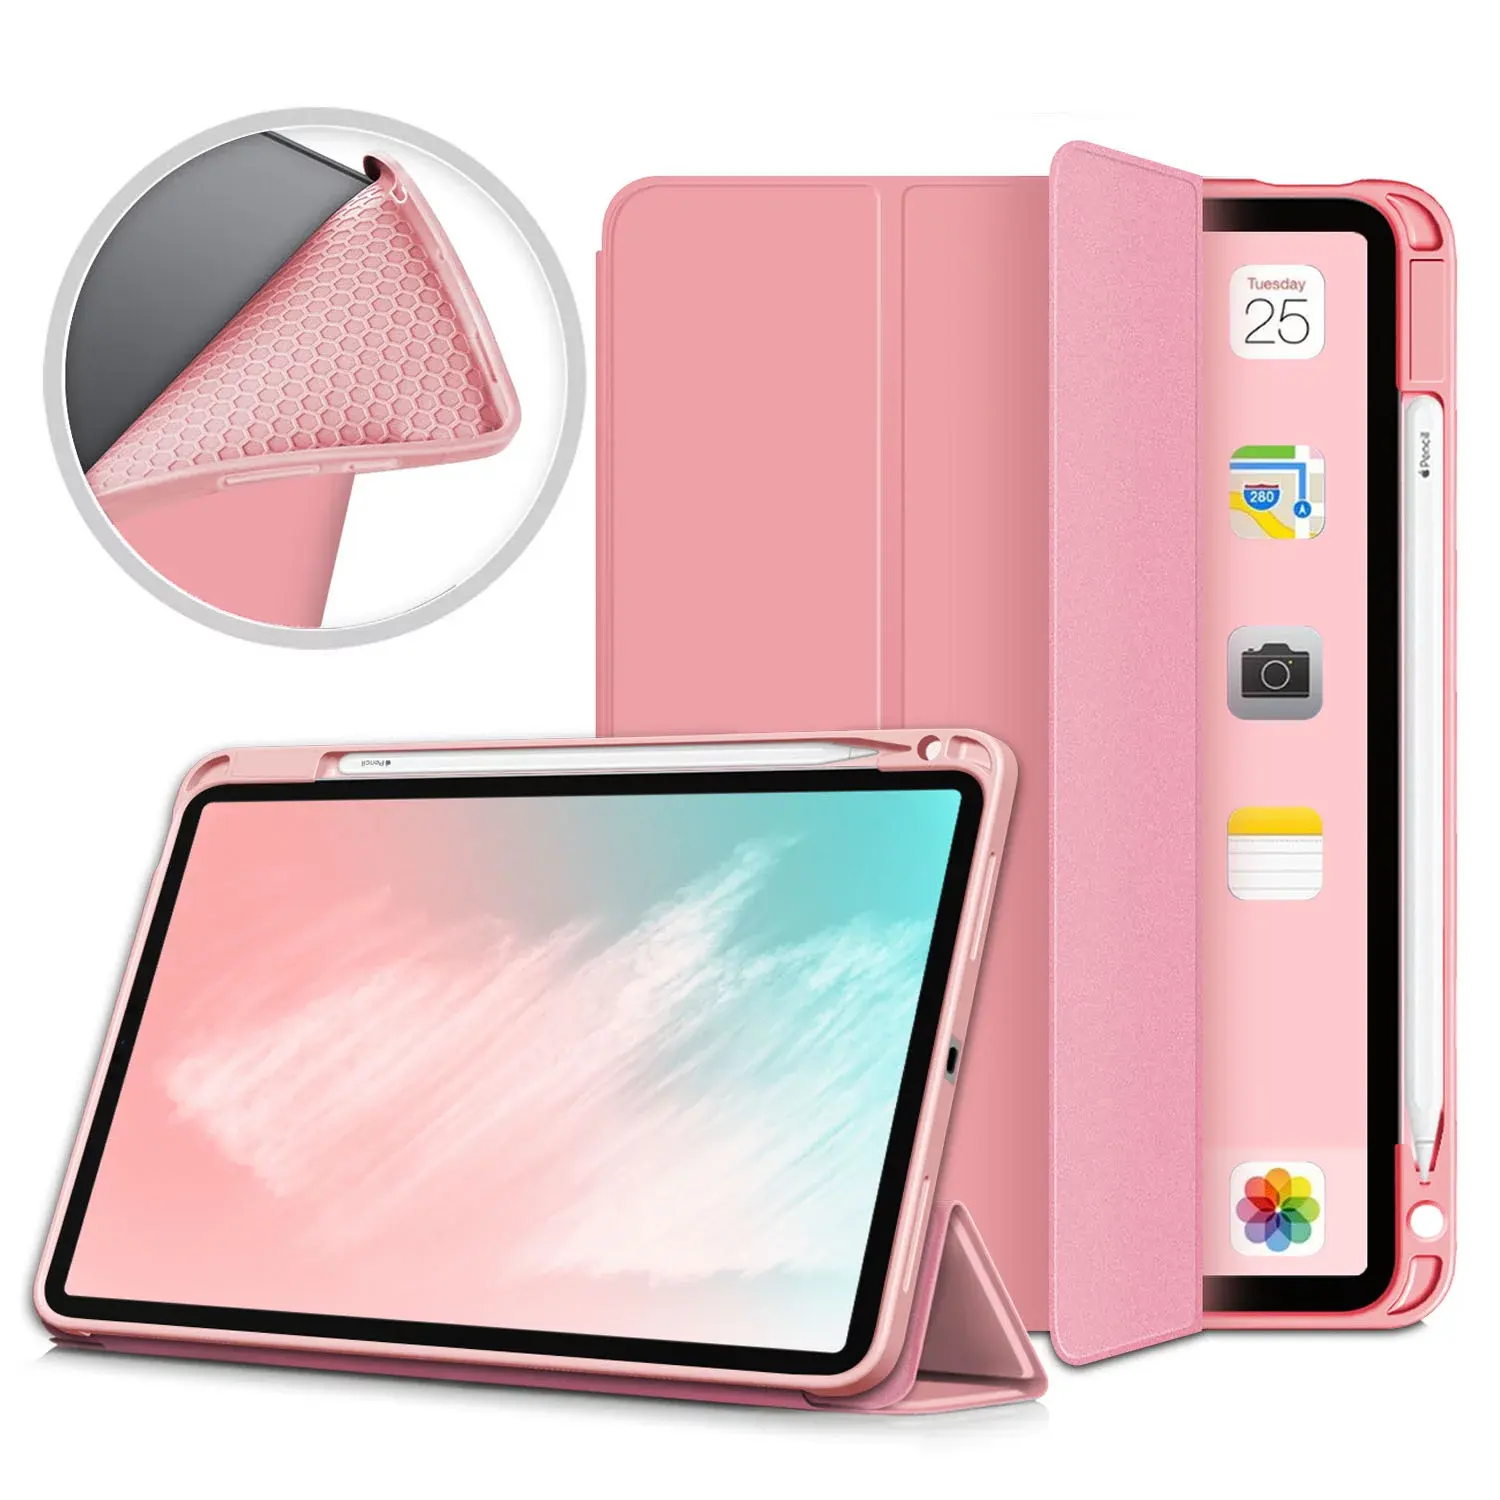 Shemax Case for iPad Pro 11 and iPad air 4 5 10.9 inch Tri-Fold Slim Fit Folio Stand Smart PU Leather Tablet Cover for iPad Air